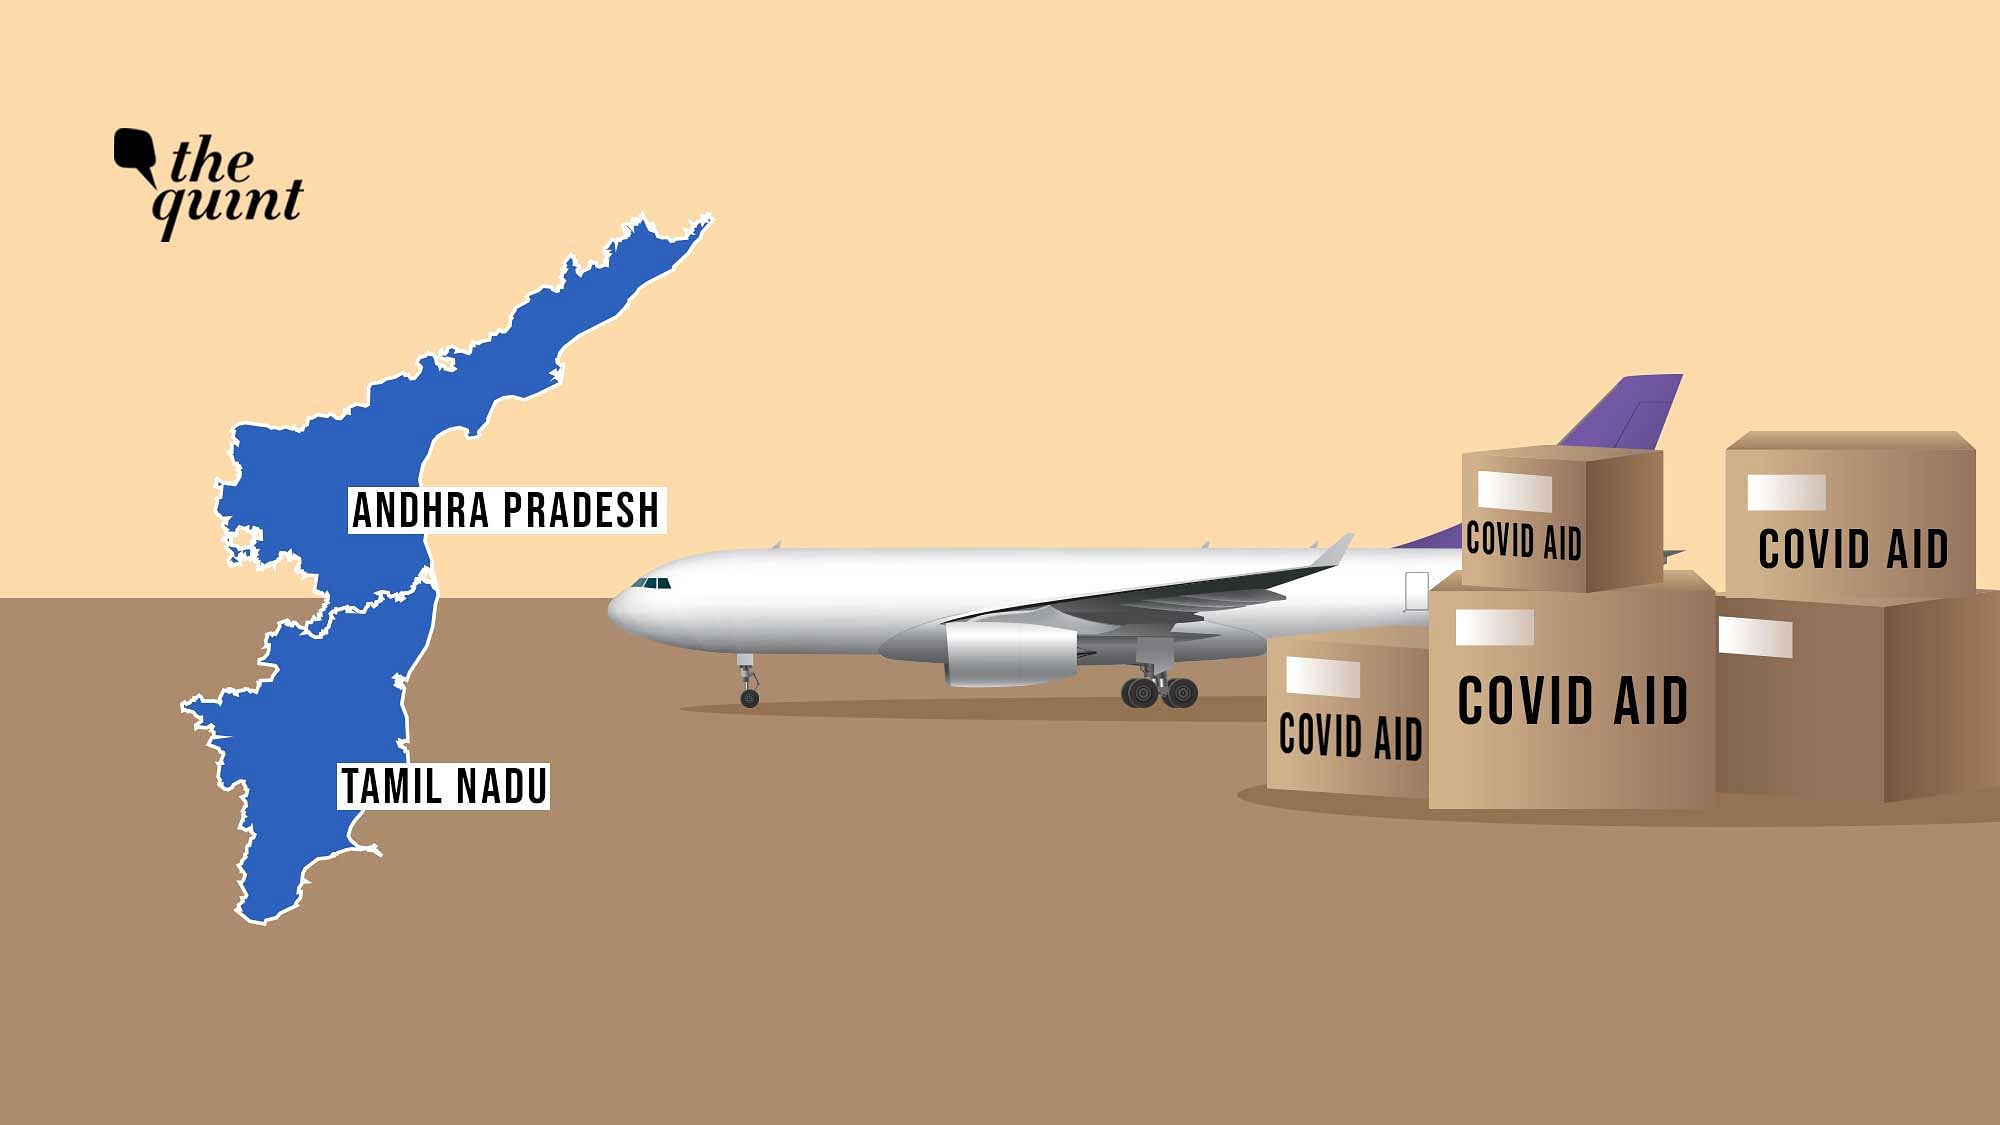 Foreign aid that has reached Andhra Pradesh and Tamil Nadu is a fraction of what has reached India.